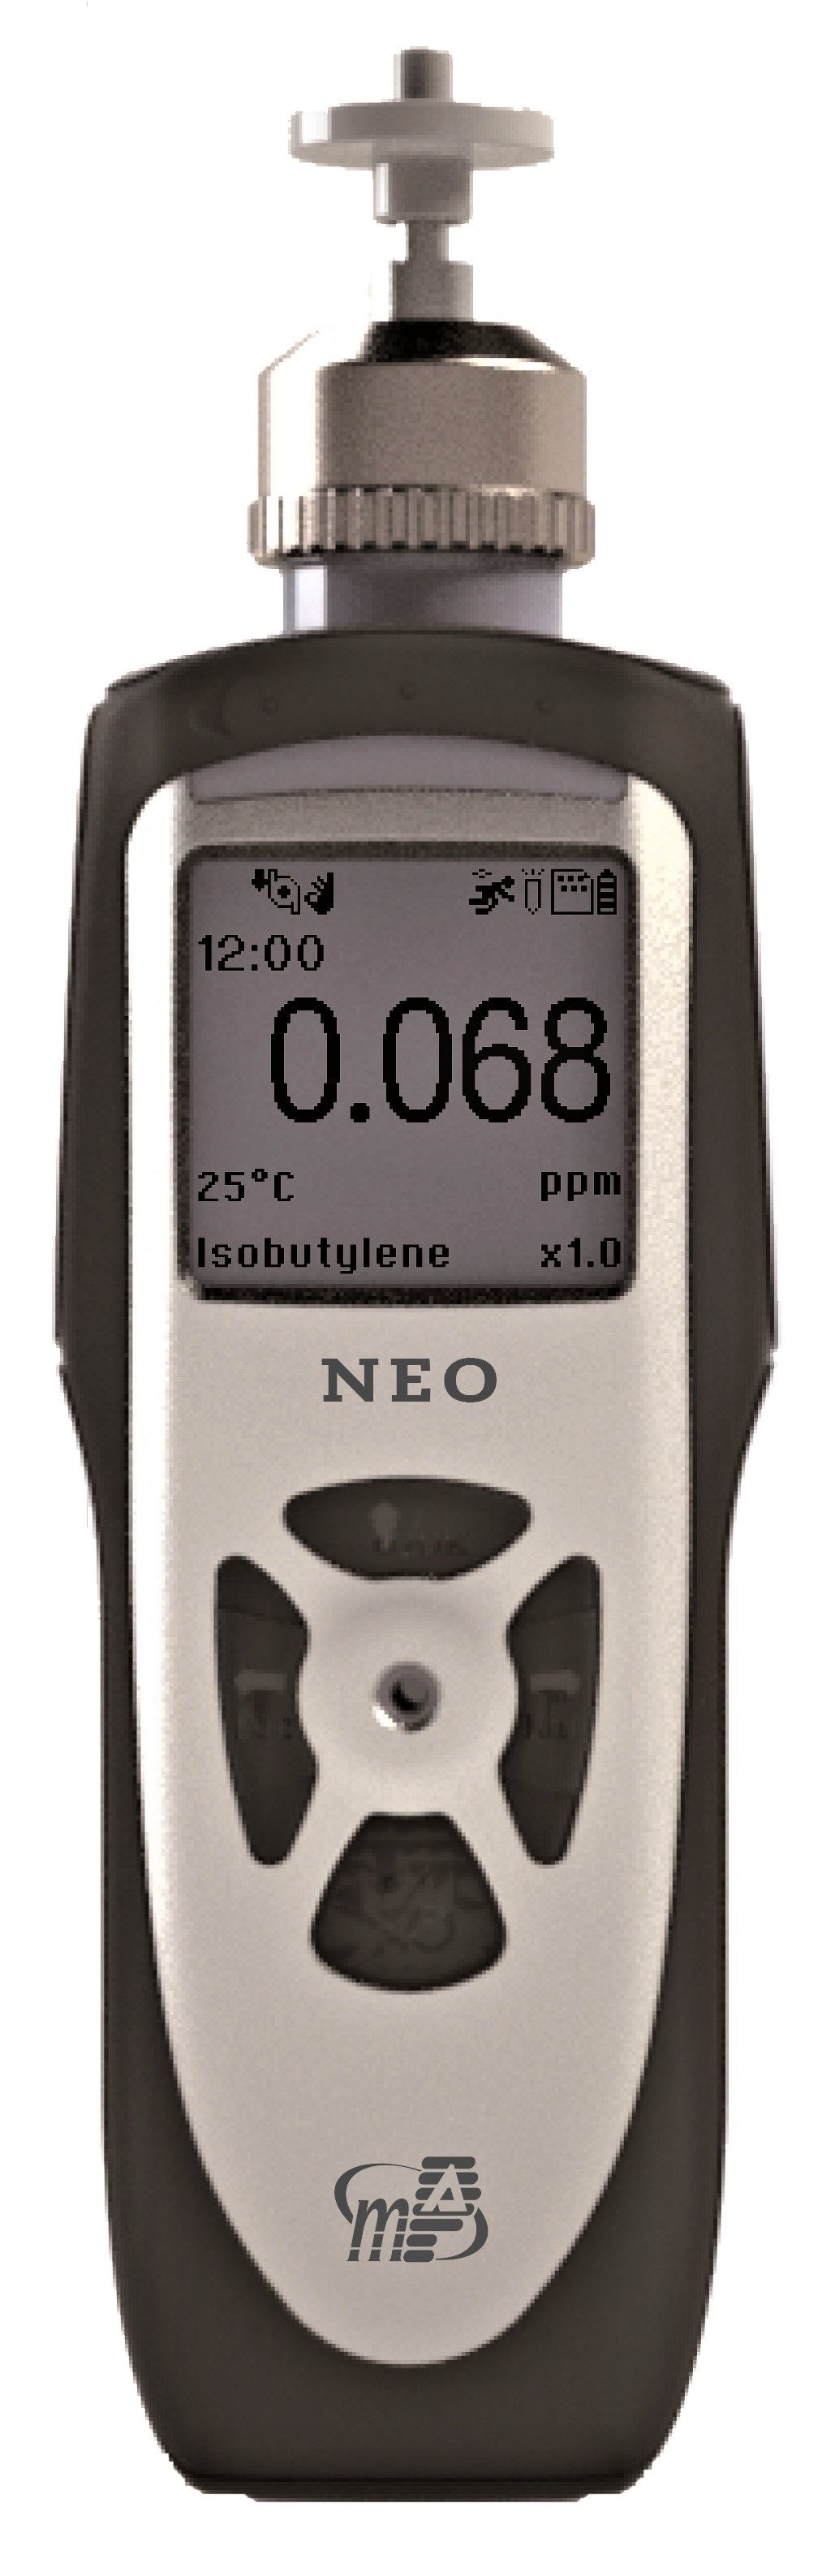 MP184 PPB NEO Photo-ionization Detector, Wireless Bluetooth with Accessories Hard Case